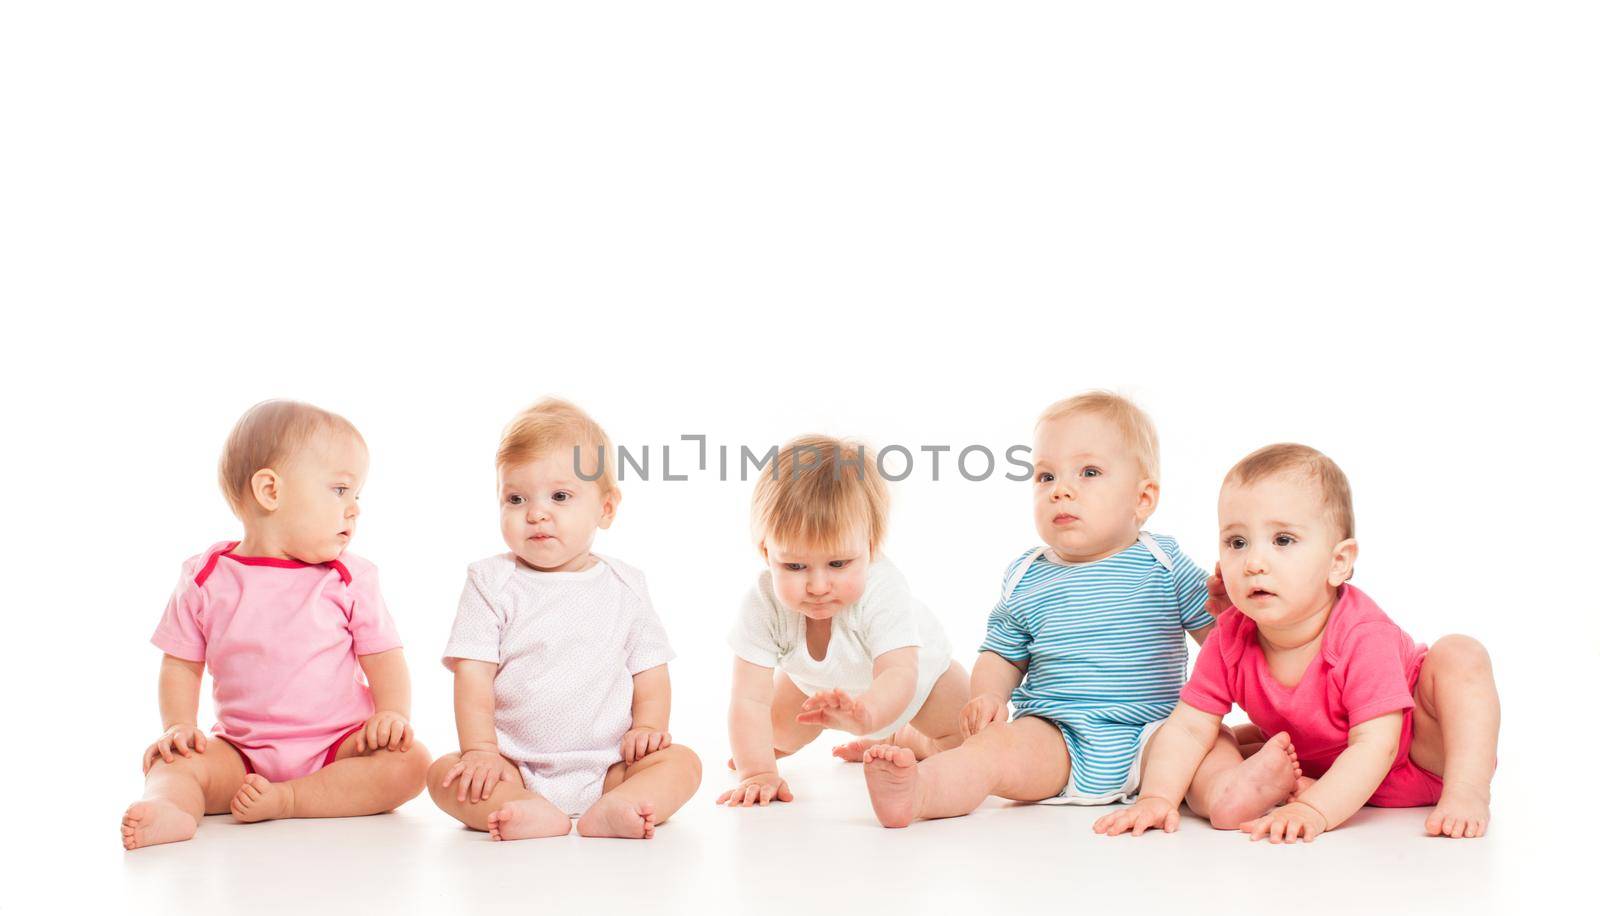 Group of witty babies sitting in different clothes, isolated on white background